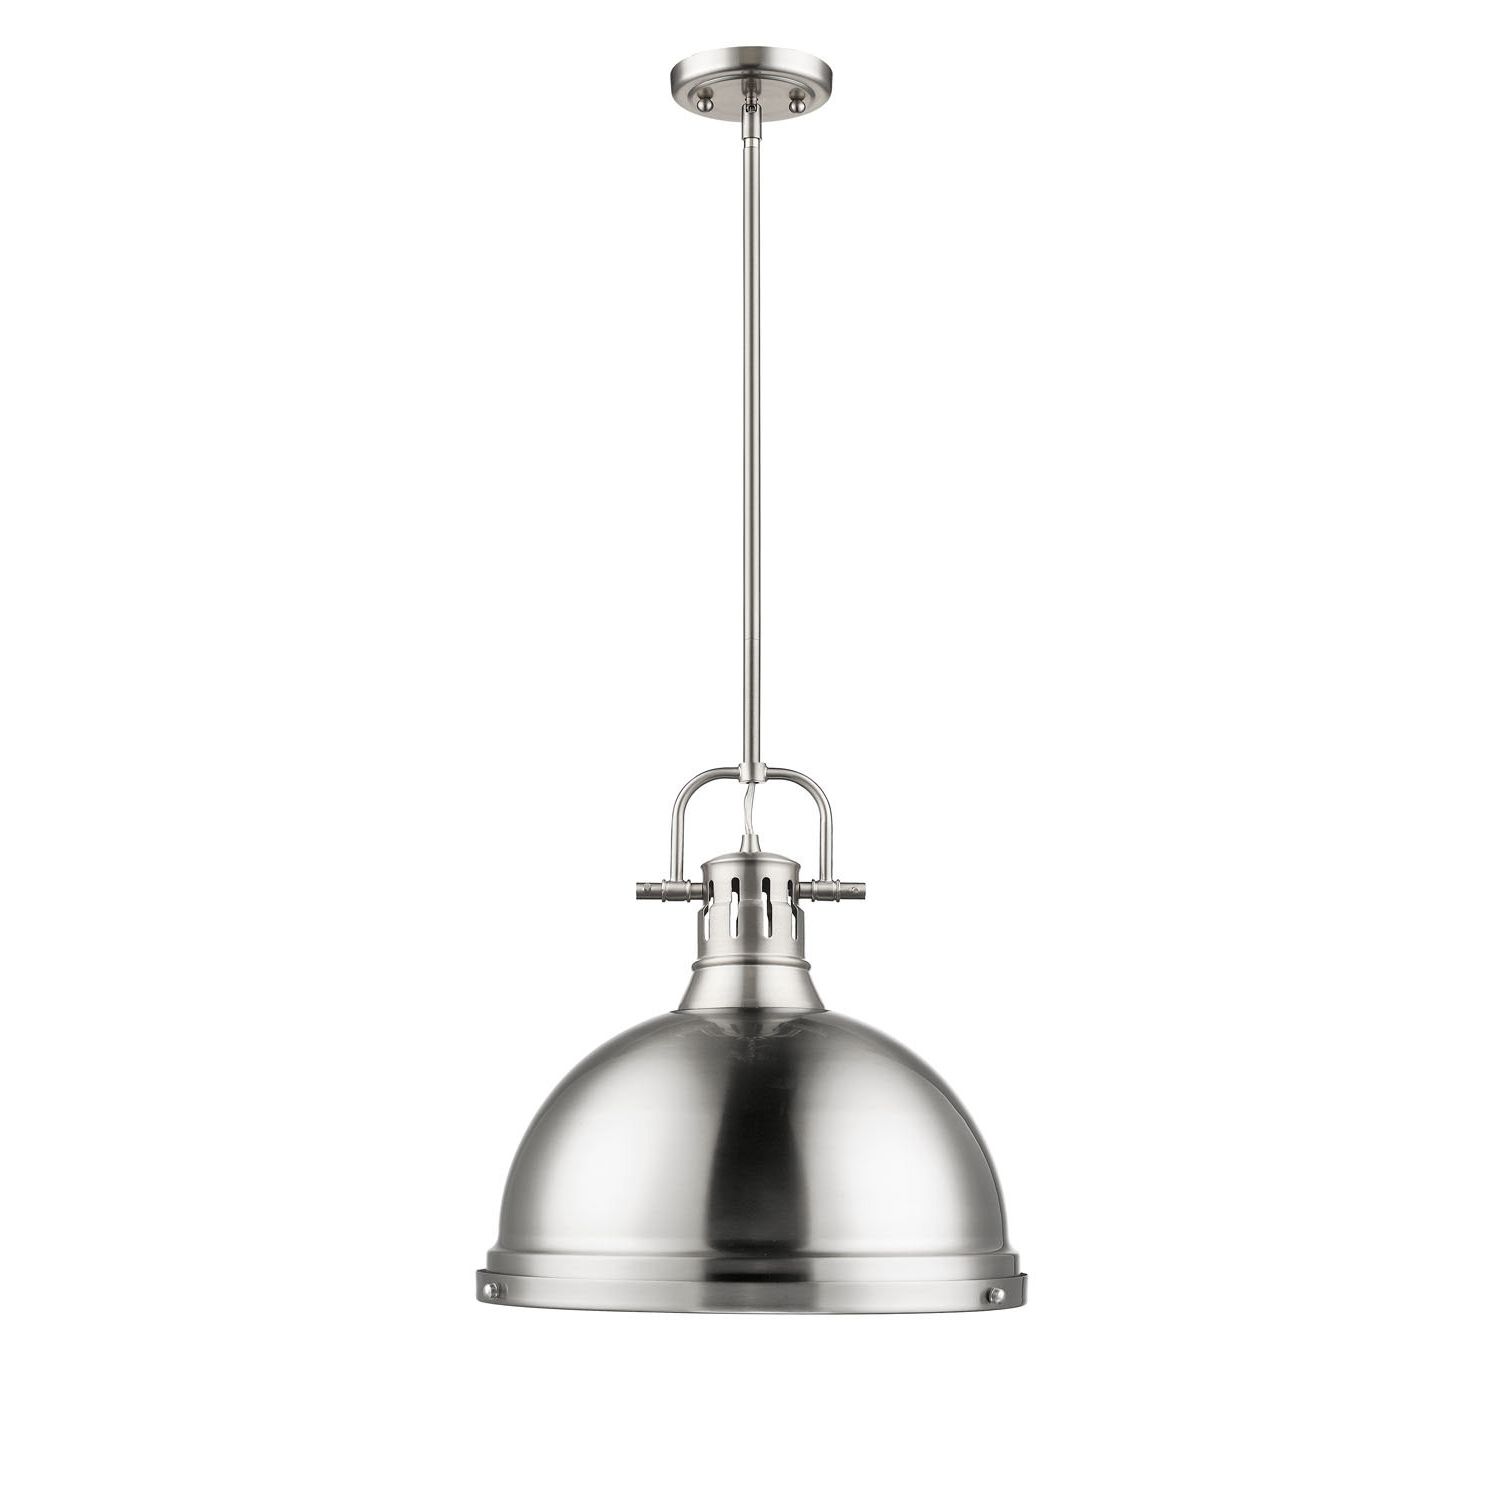 Most Popular Bodalla 1 Light Single Dome Pendants Pertaining To Bodalla 1 Light Single Dome Pendant & Reviews (View 6 of 25)